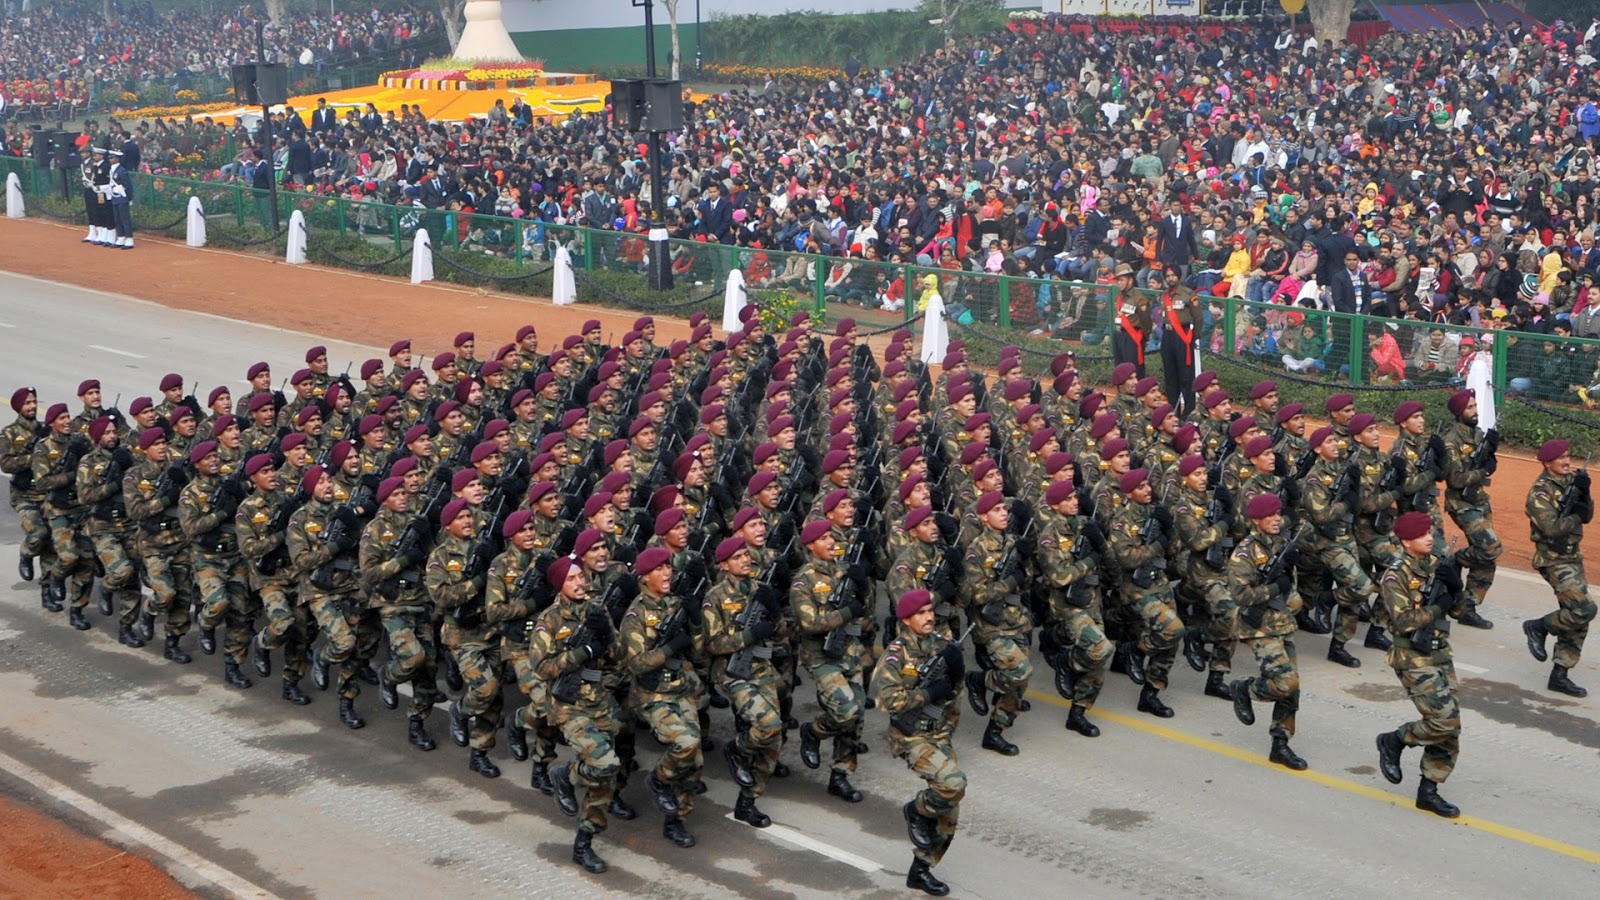 Army Hd Wallpapers Images Latest Army Full Hd Pictures - Indian Army Republic Day Parade 2018 - HD Wallpaper 